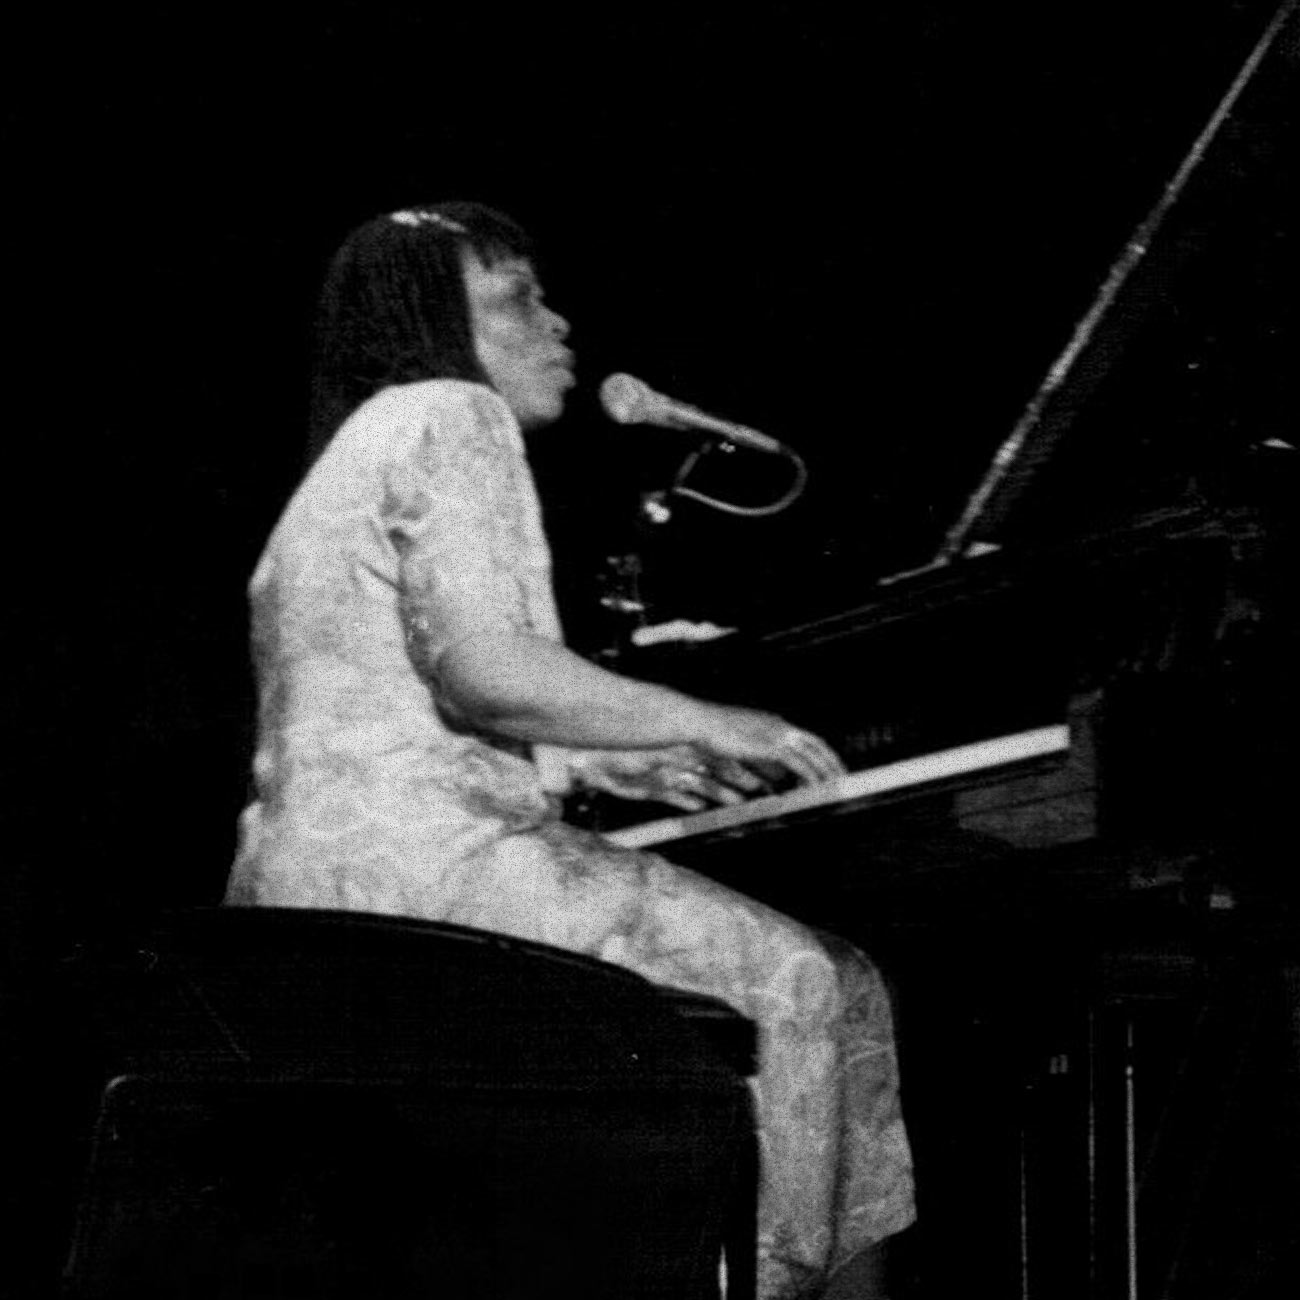 Amina Claudine Meyers plays the piano and sings in the microphone in this black and white image taken in Paris in 1983.